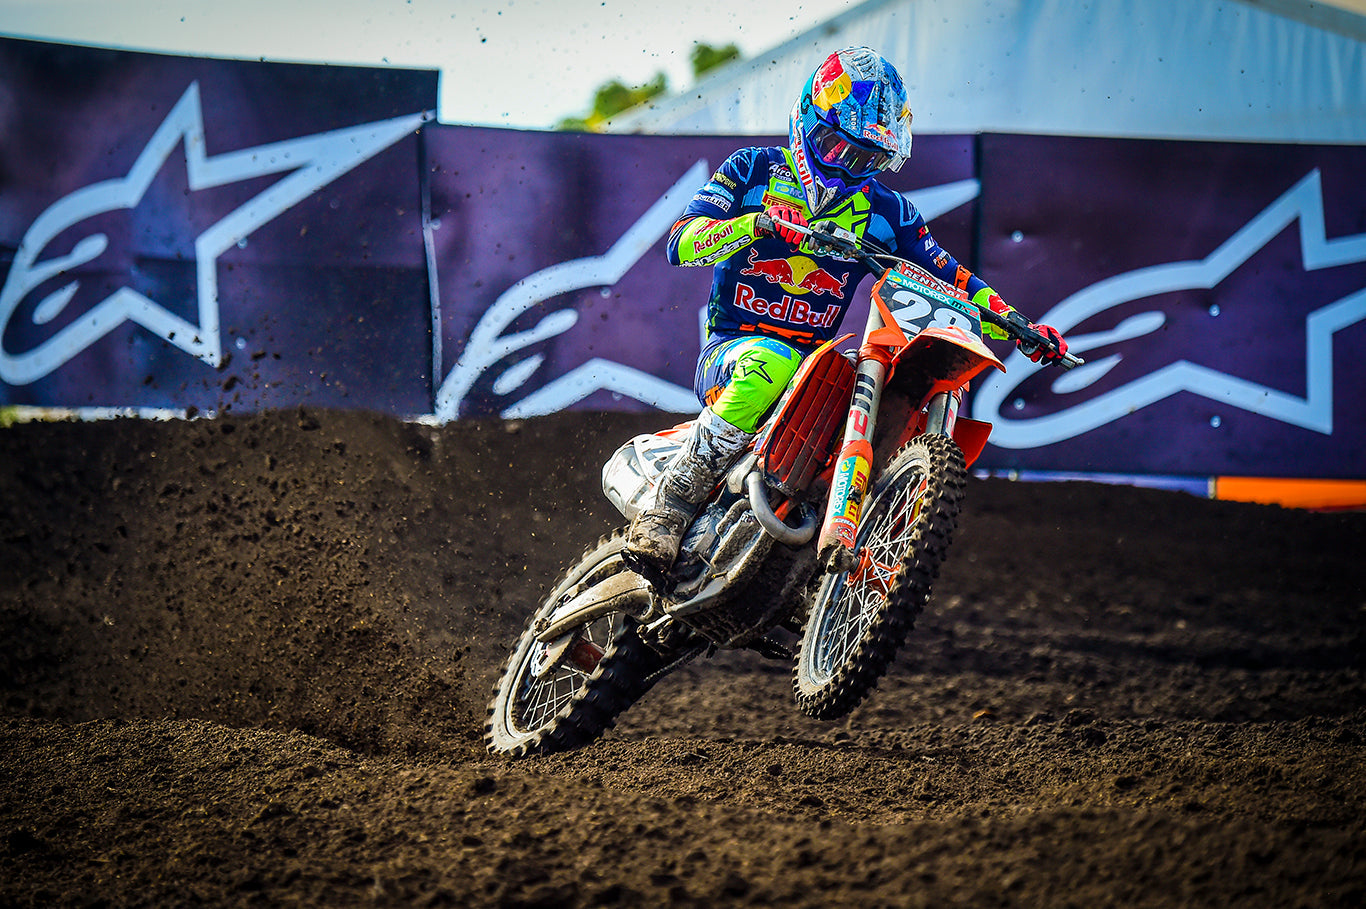 TOM VIALLE WINS BOTH MOTOS AND THE MX2 OVERALL WITH THIBAULT BENISTANT THIRD IN SAMOTA-SUMBAWA, INDONESIA